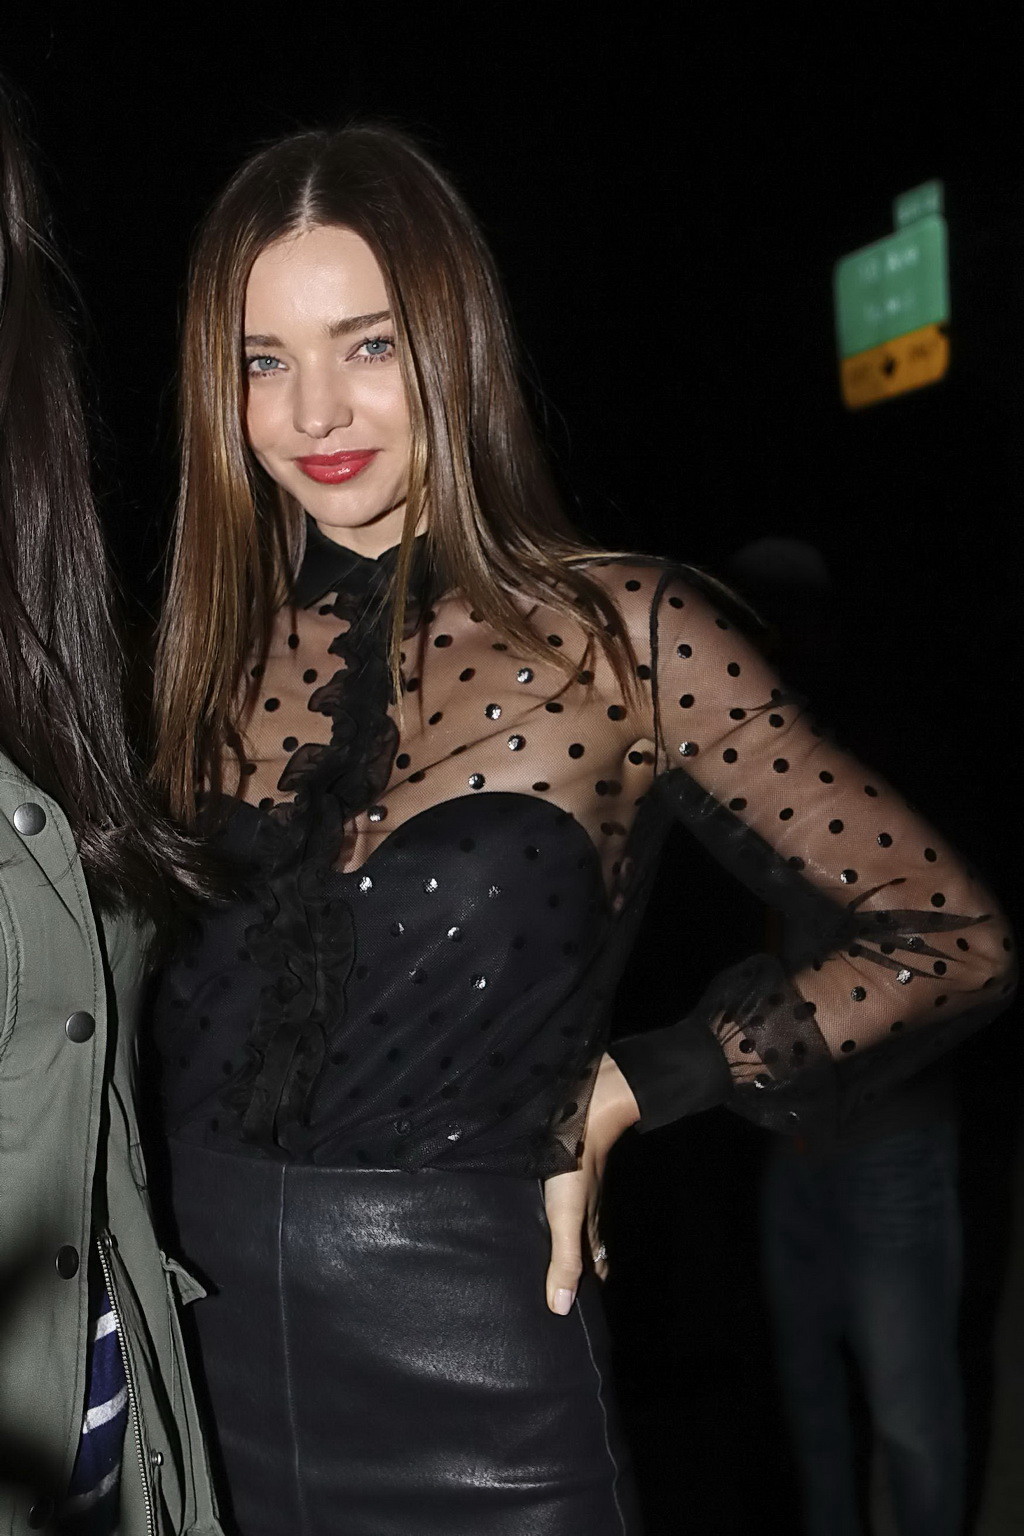 Miranda Kerr looking hot in black partially see-thru leather dress out in NYC #75233298